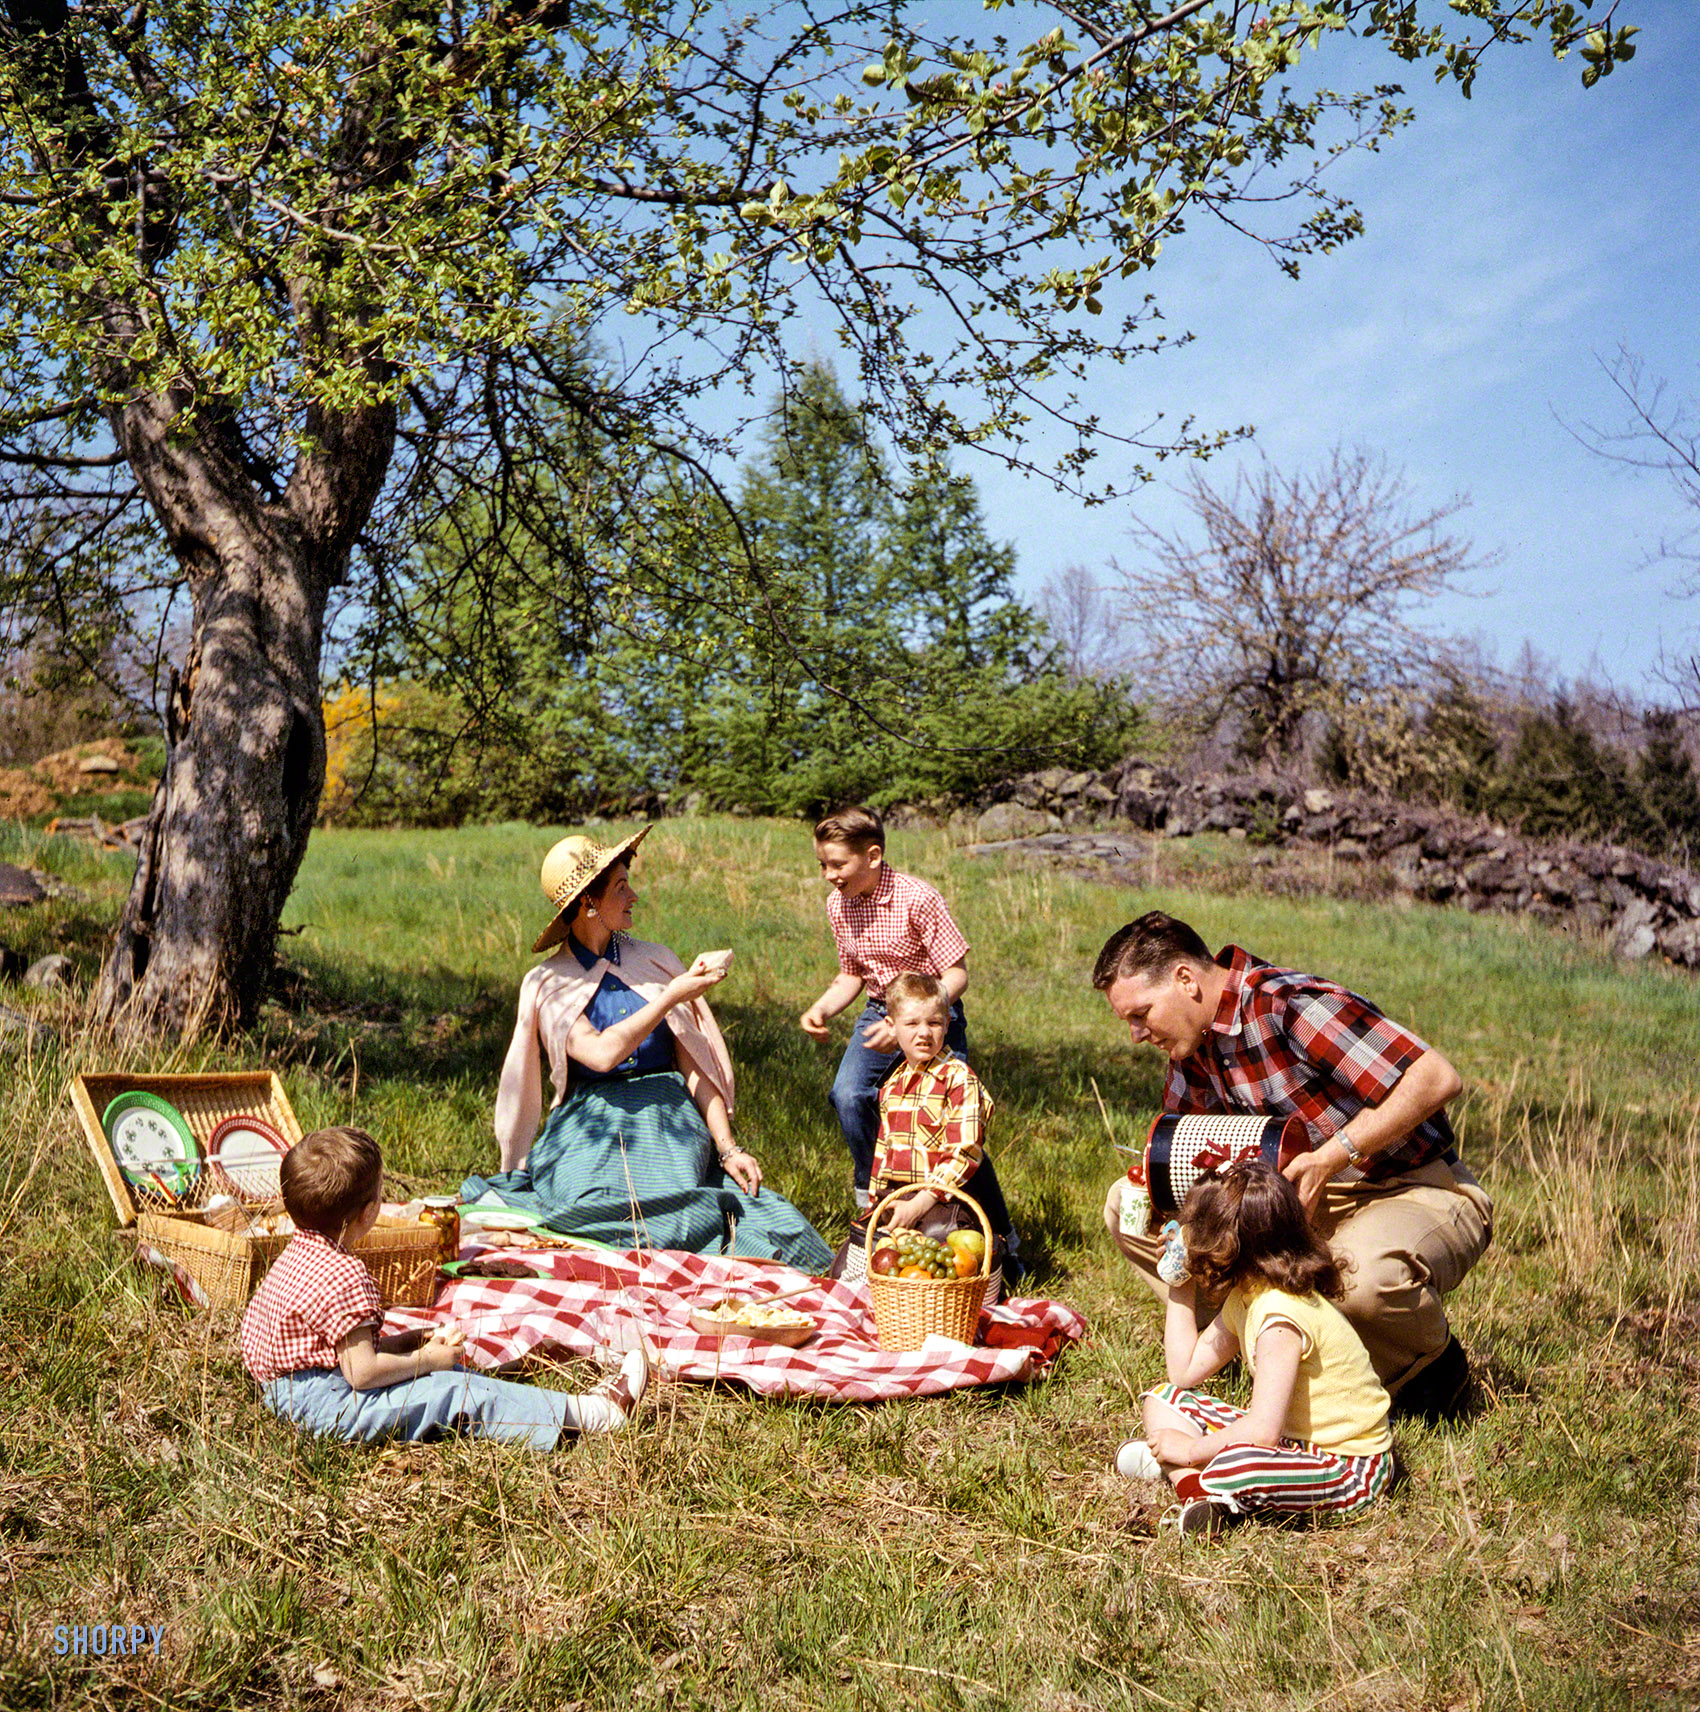 May 3, 1955. "Family picnicking and barbecuing outdoors." Color transparency from photos by Arthur Rothstein and Bob Dierks for the Look magazine assignment "America Is Bit by the Barbecue Bug." View full size.